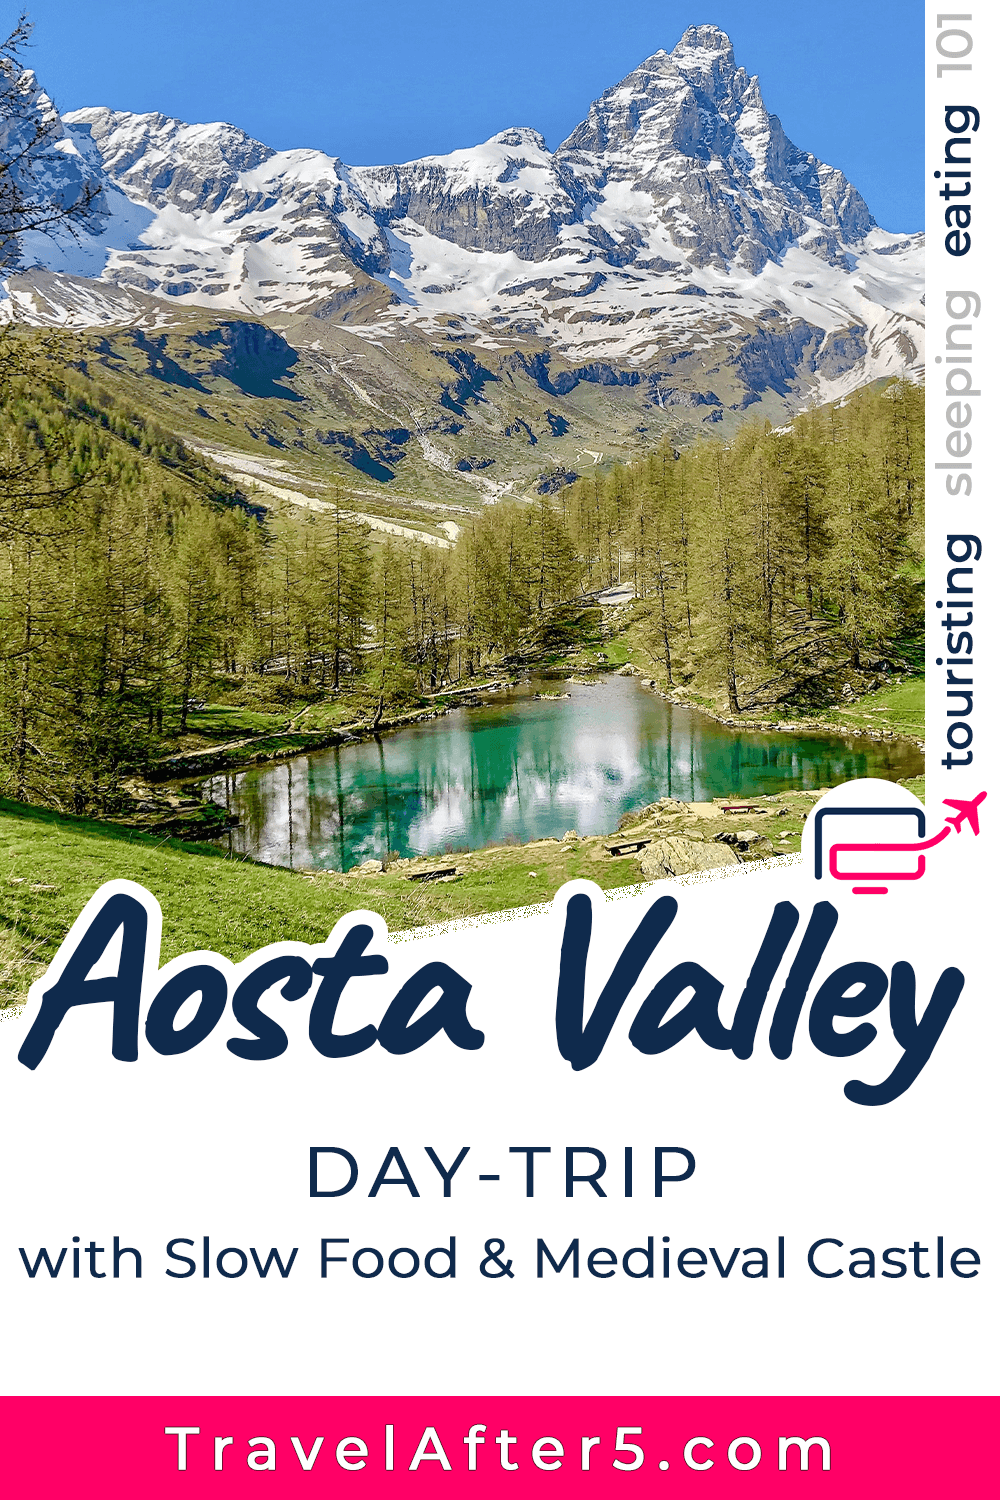 Pinterest Pin_Day-Trip to the Aosta Valley, Italy, by Travel After 5